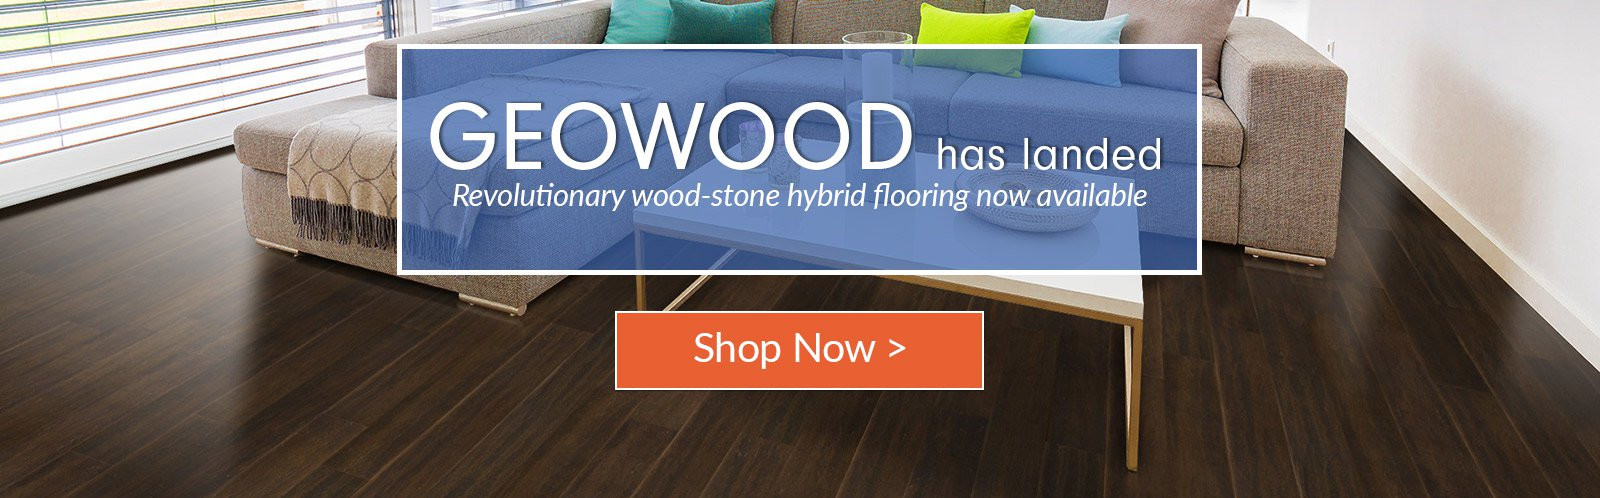 12 Best Hardwood Flooring Reno Nv 2024 free download hardwood flooring reno nv of green building construction materials and home decor cali bamboo with regard to geowood launch homepage slider